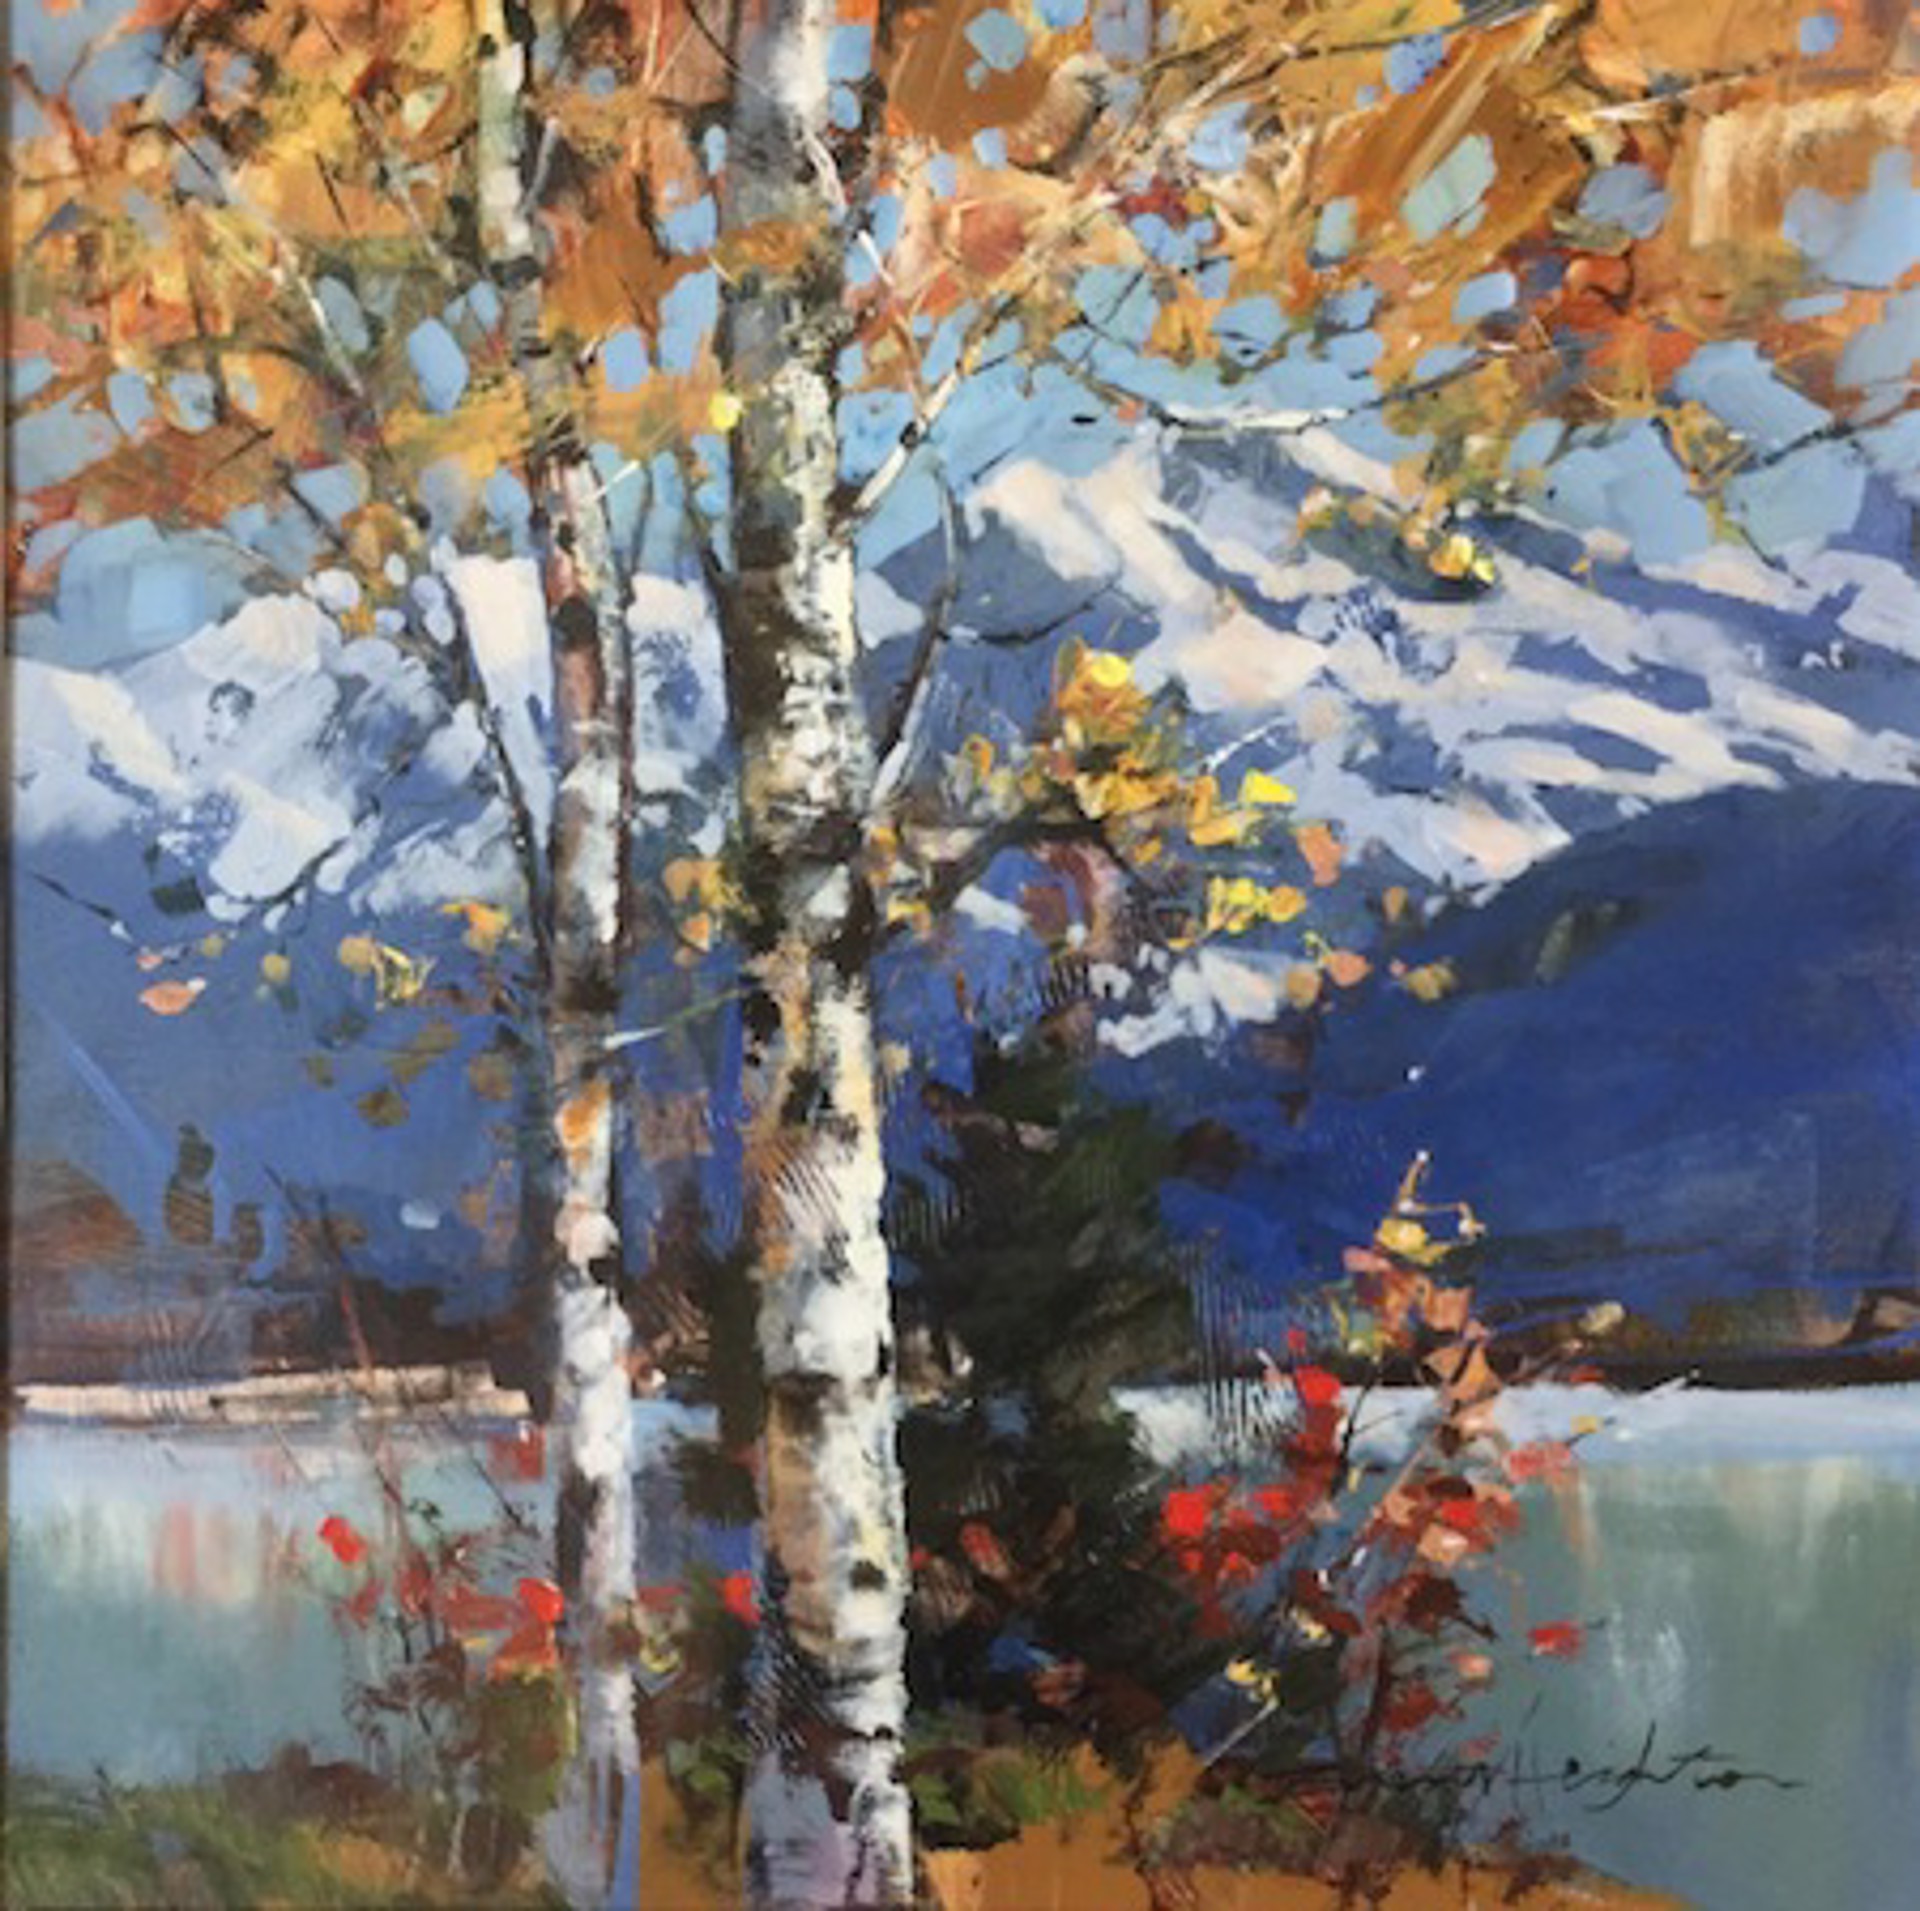 Reflections by Brent Heighton